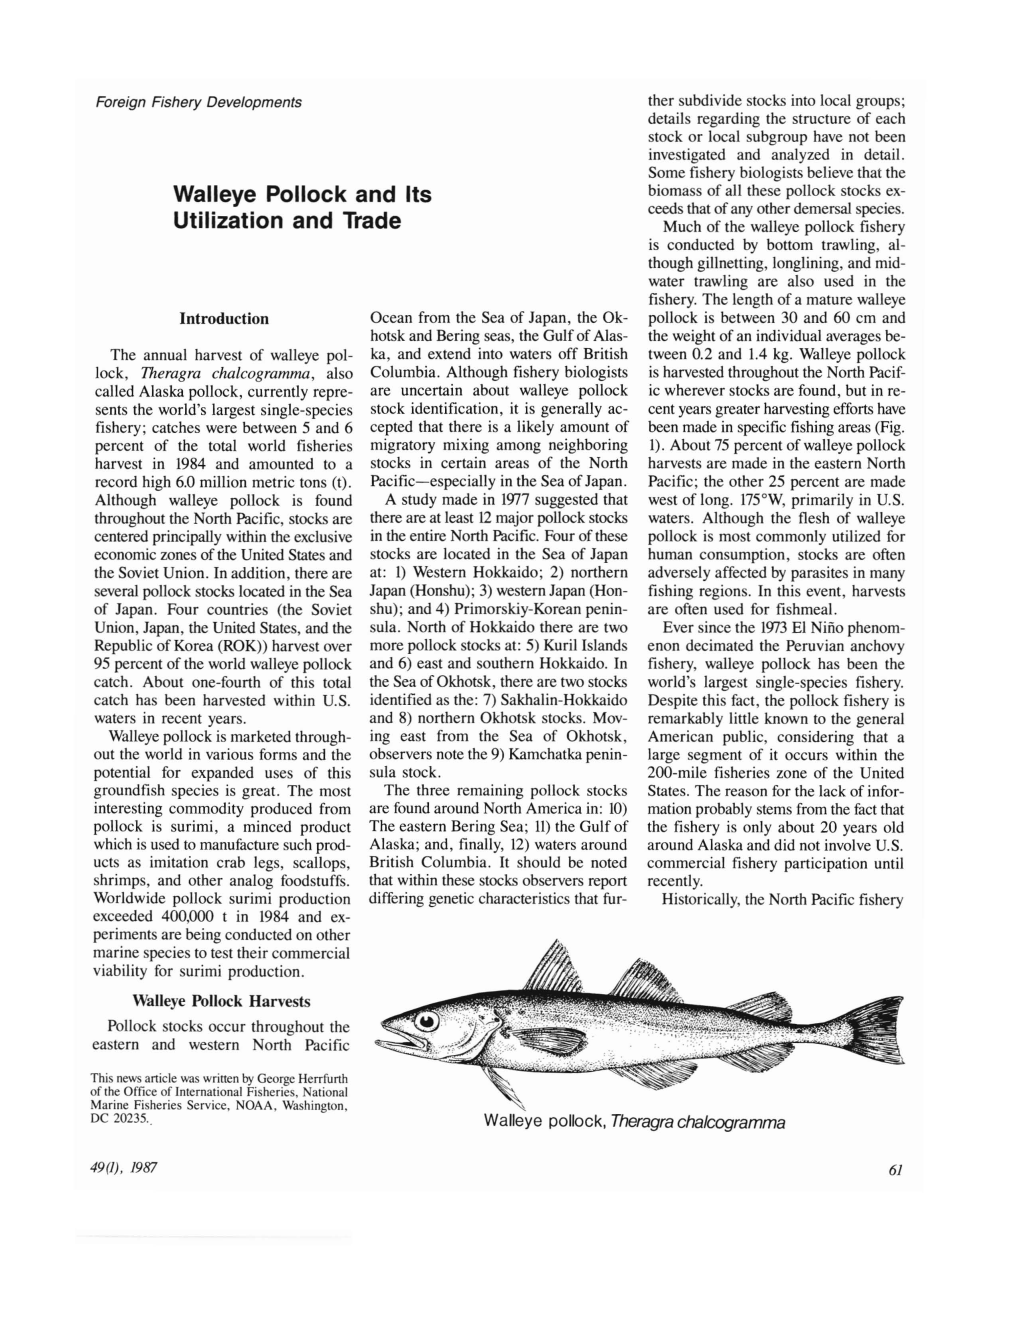 Walleye Pollock and Its Utilization and Trade